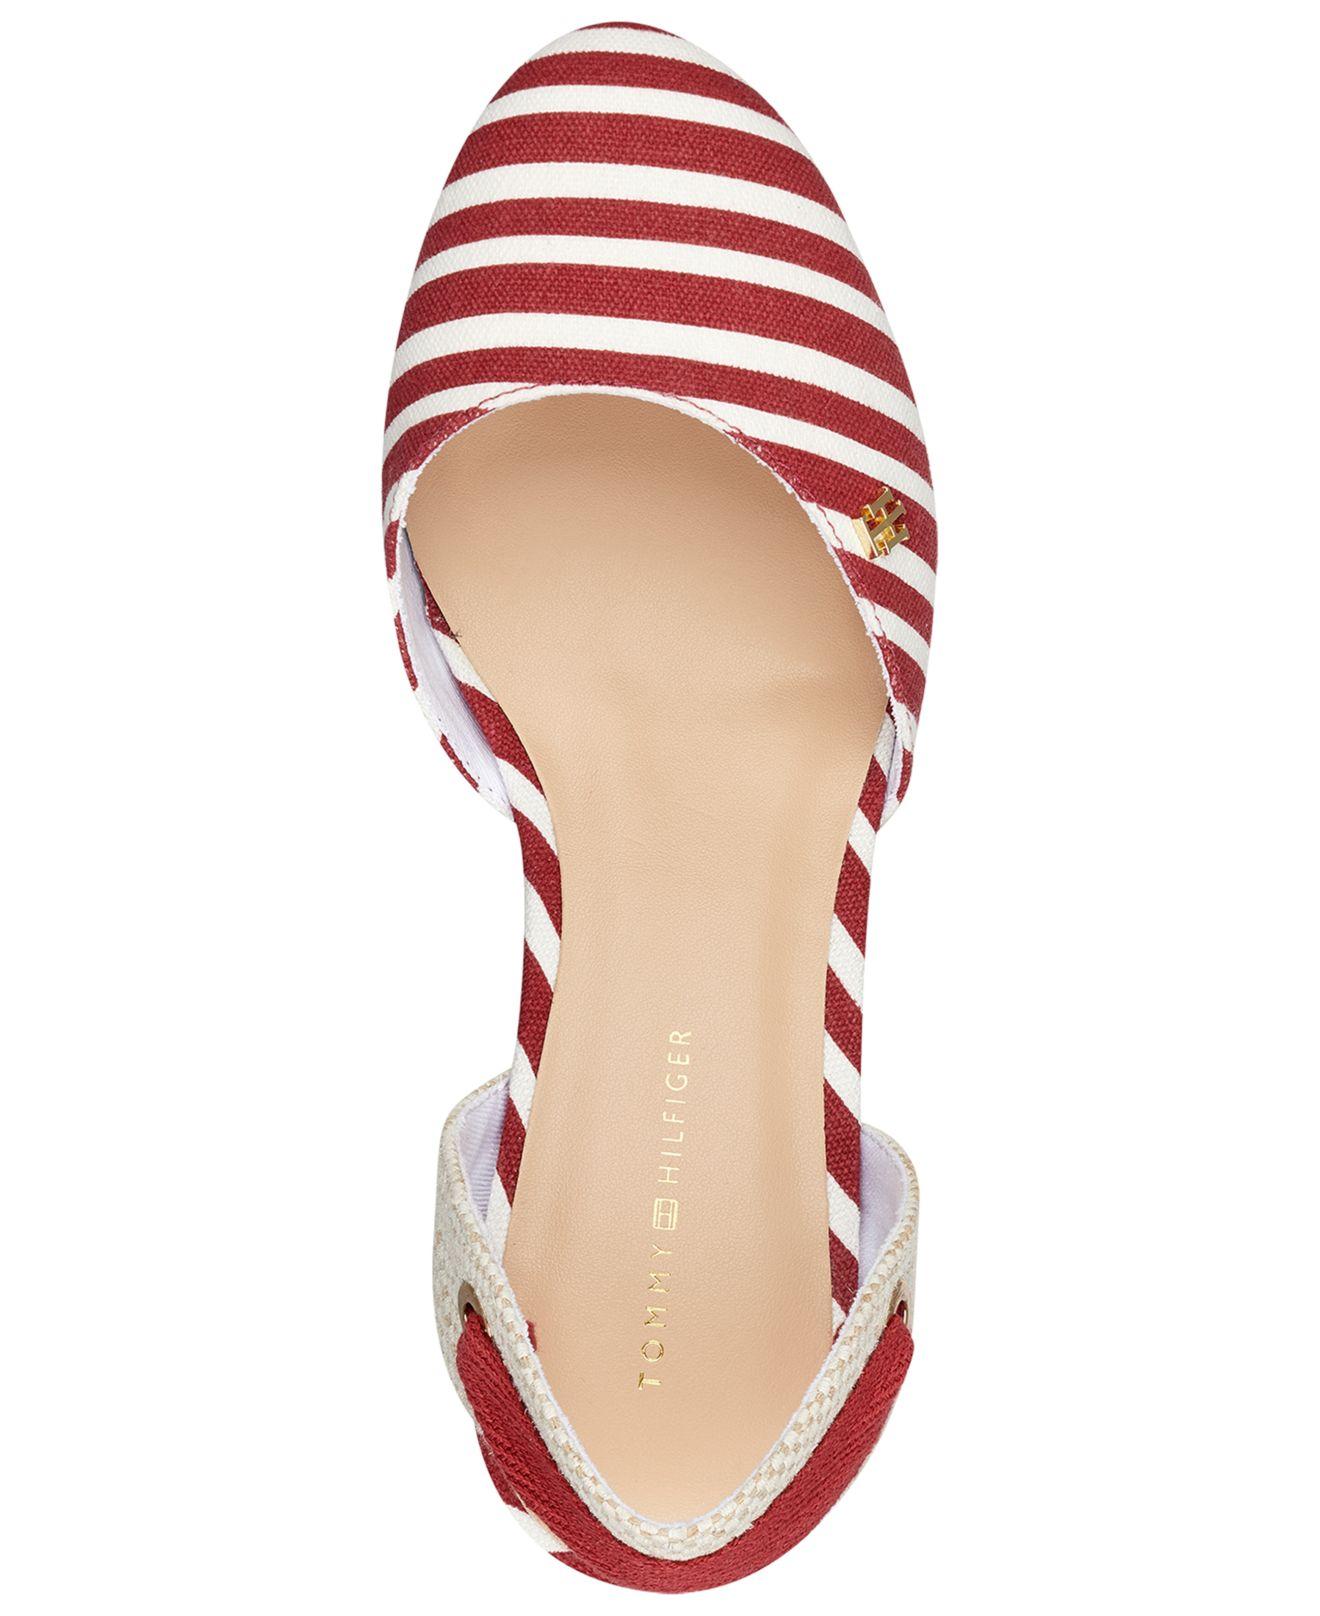 tommy hilfiger nowell wedges